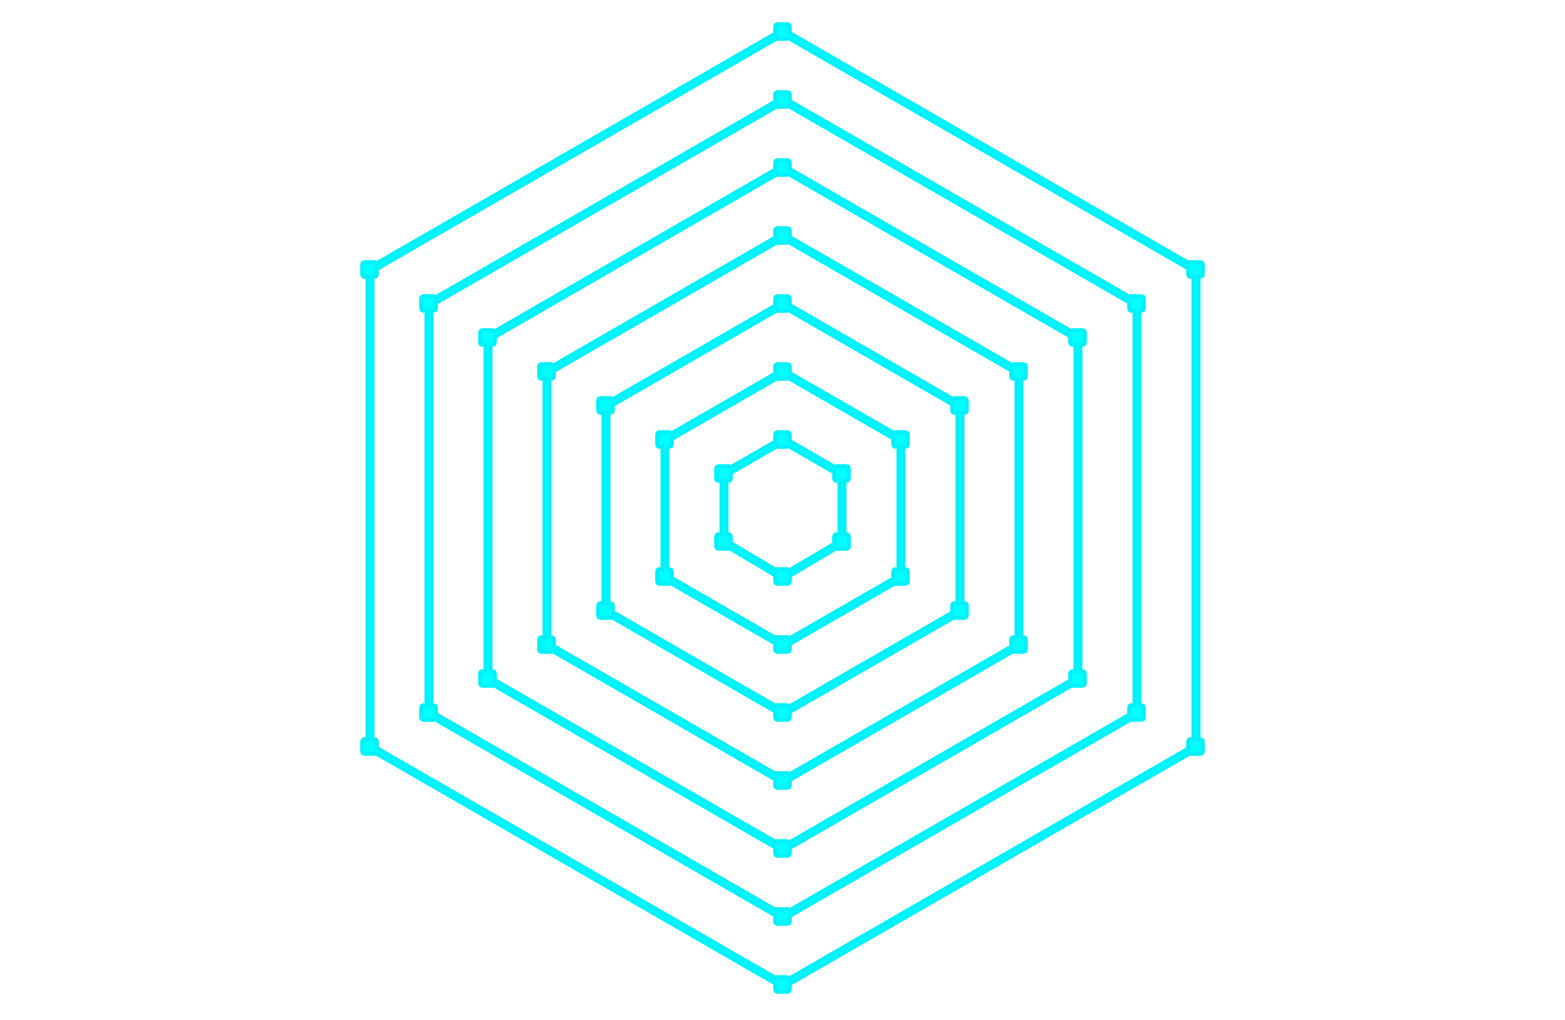 A series of concentric hexagons